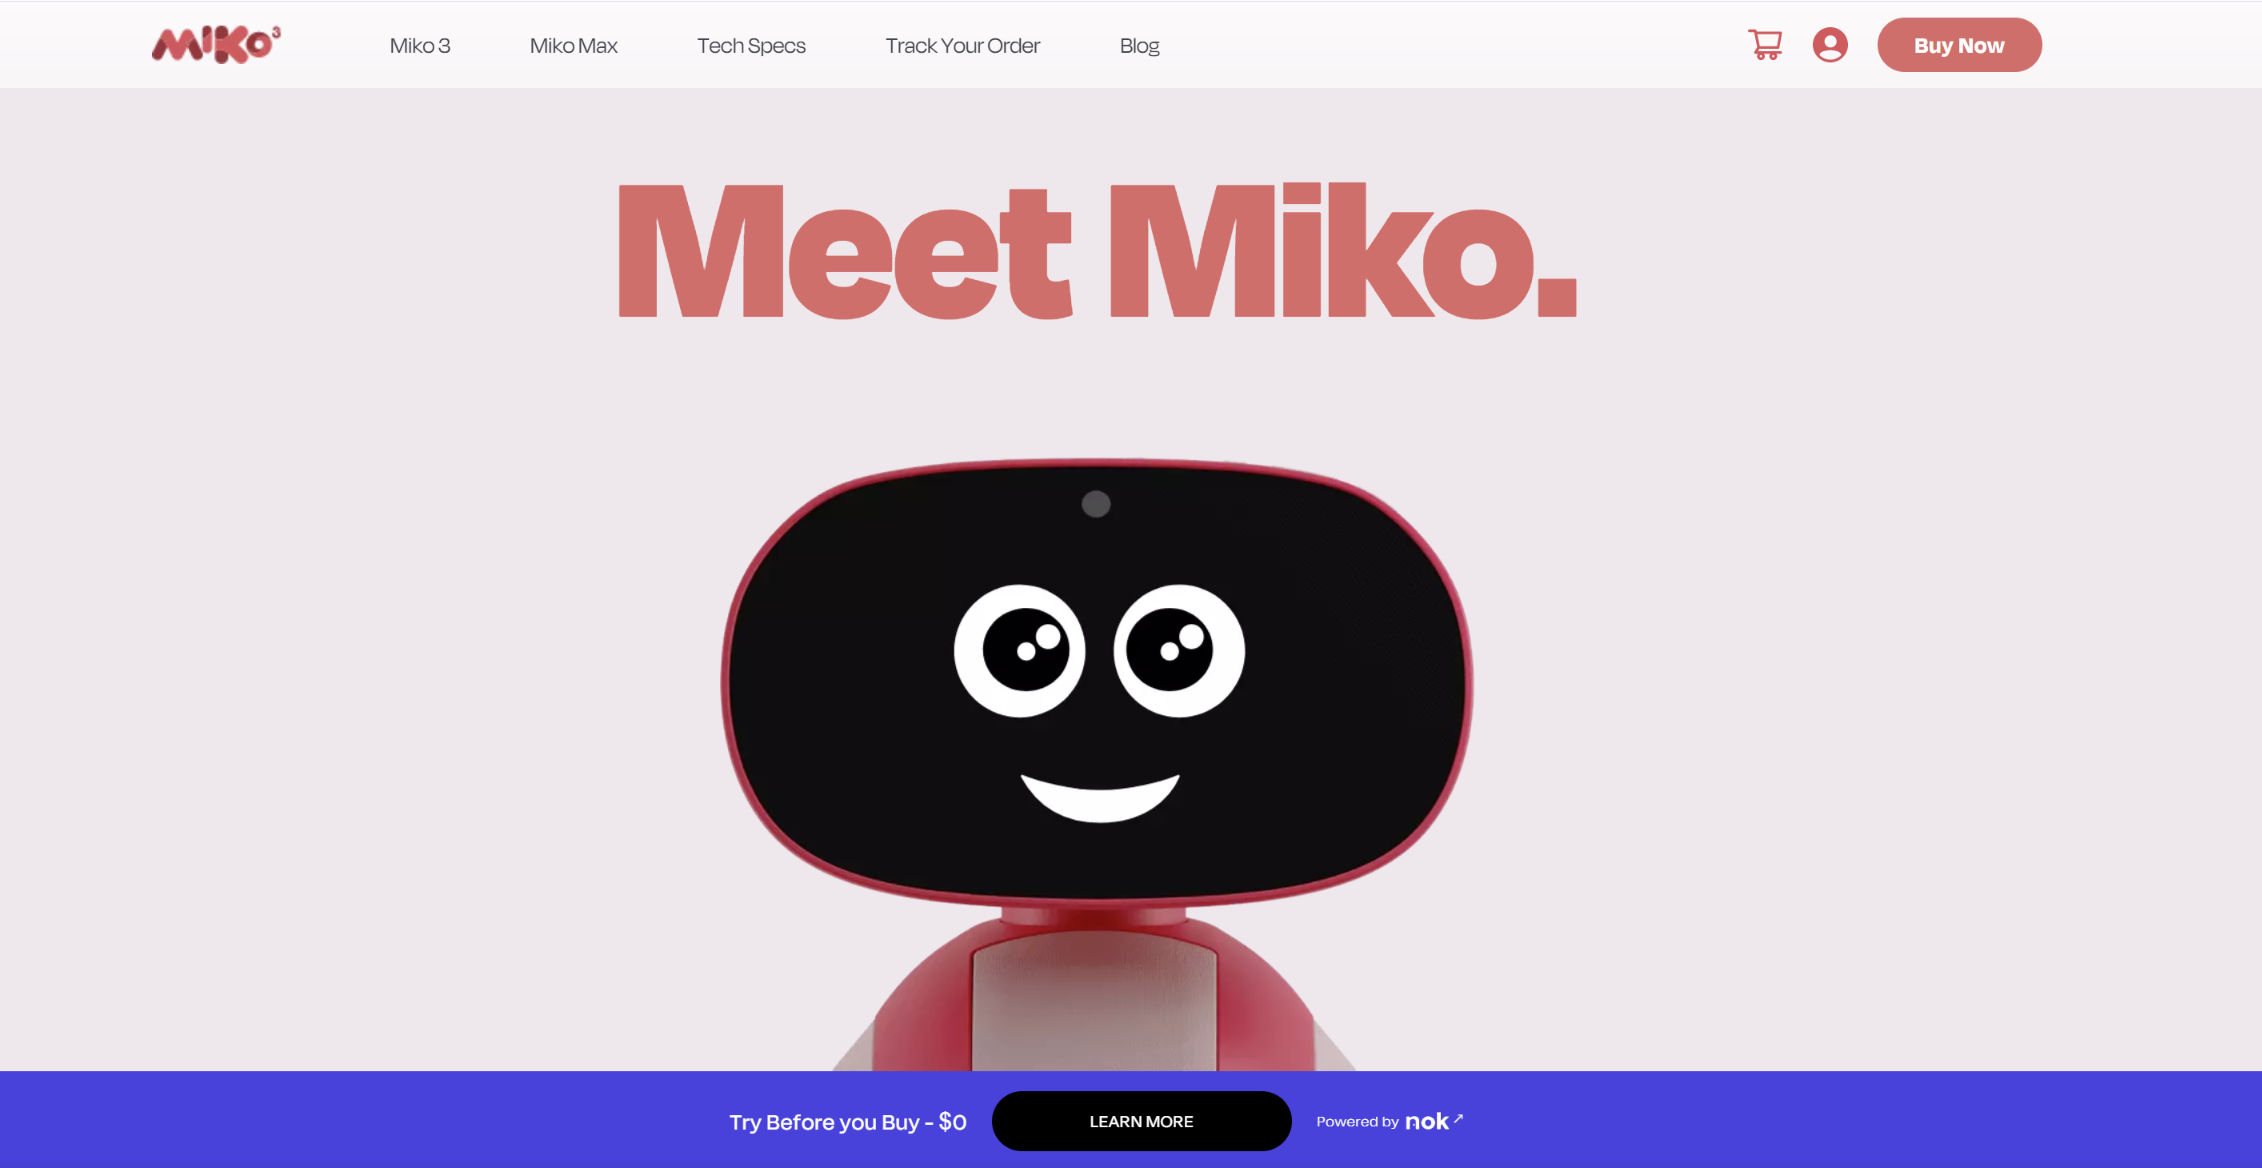 Kidscreen » Archive » Kidoodle.TV launches on interactive Miko 3 robot